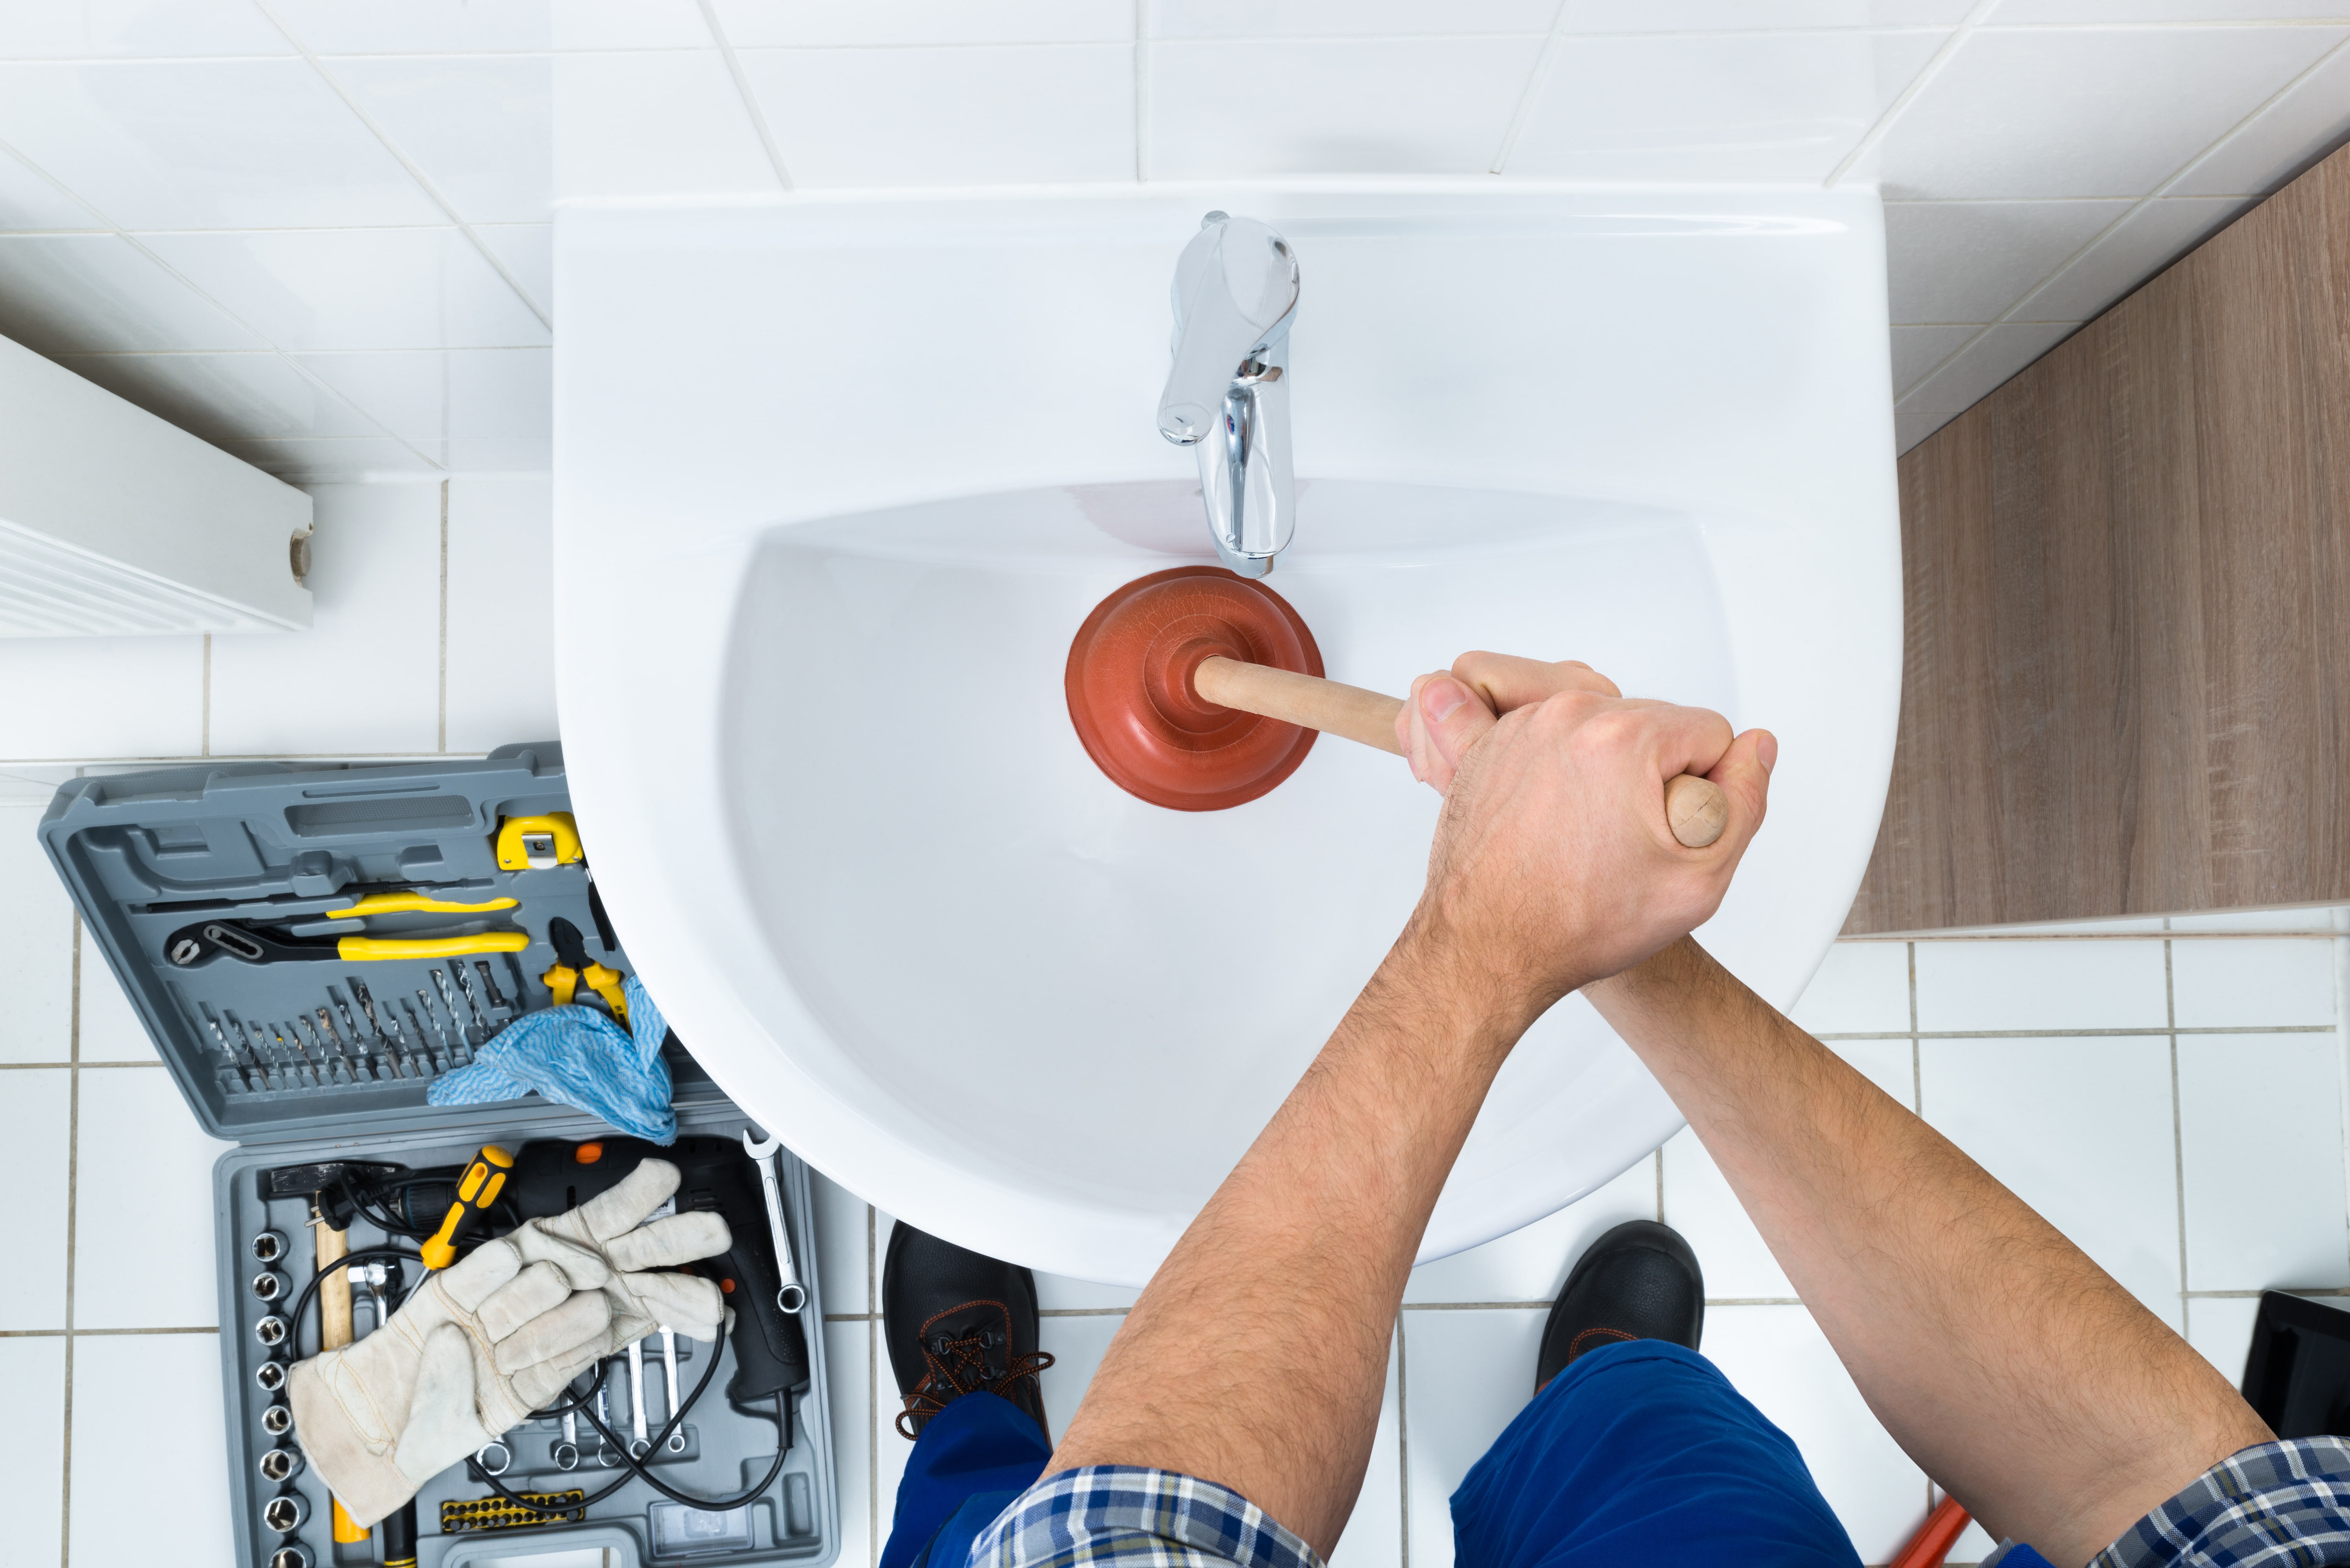 How to unblock your drain before calling the pros - Easy DIY recipes